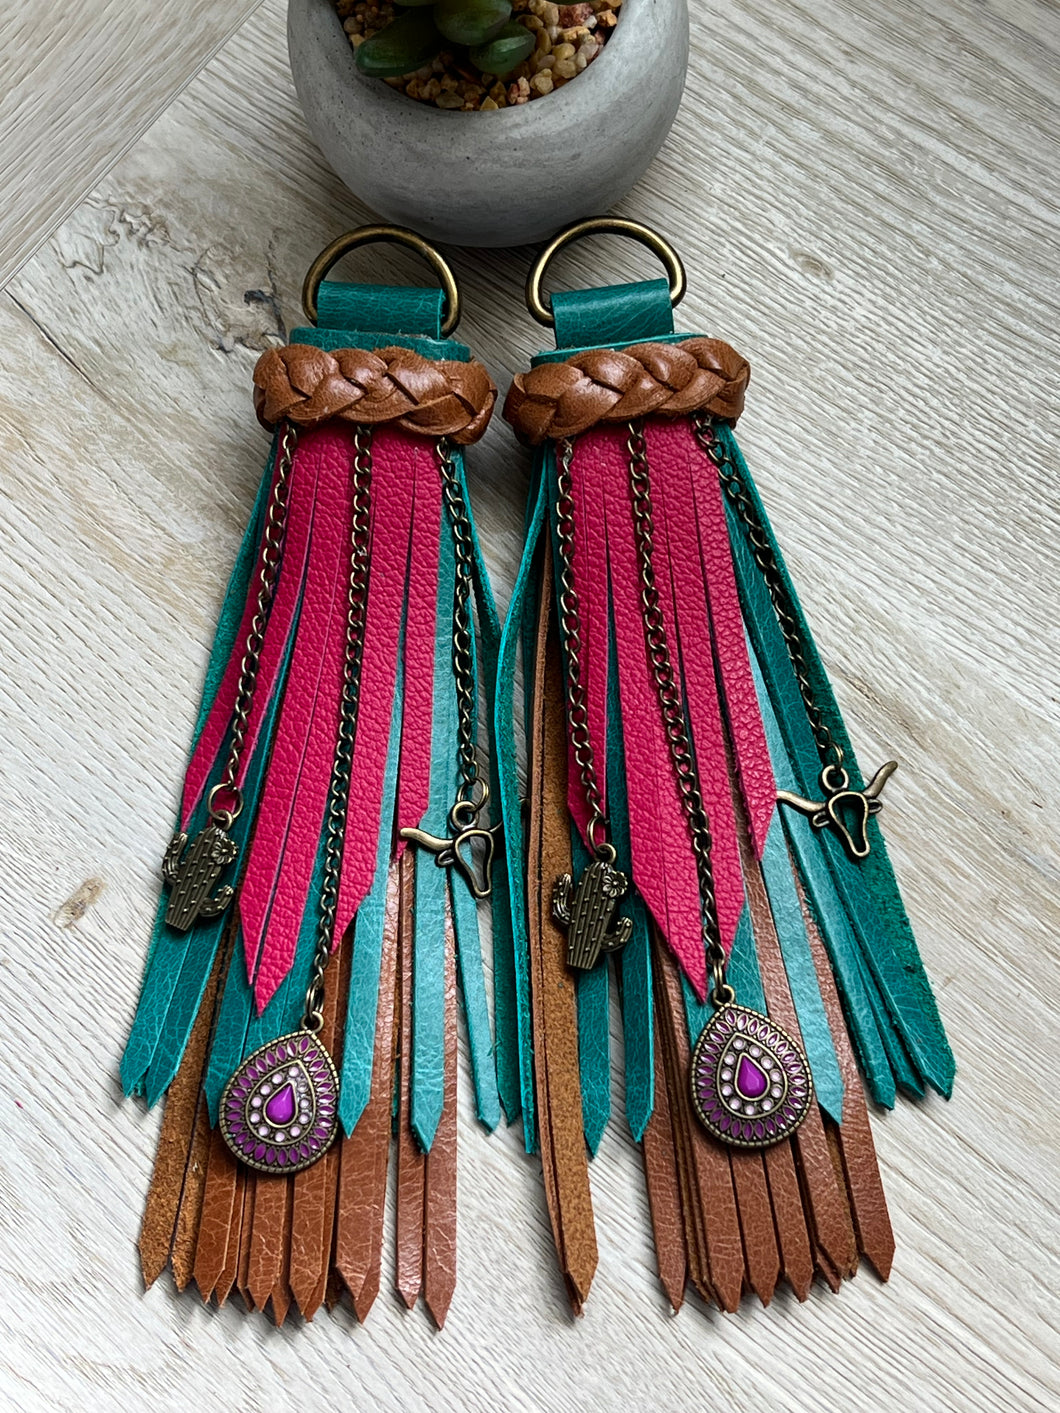 D- Ring Tassels - Cafe, Turquoise and Raspberry Leather with Antique Bronze Charms